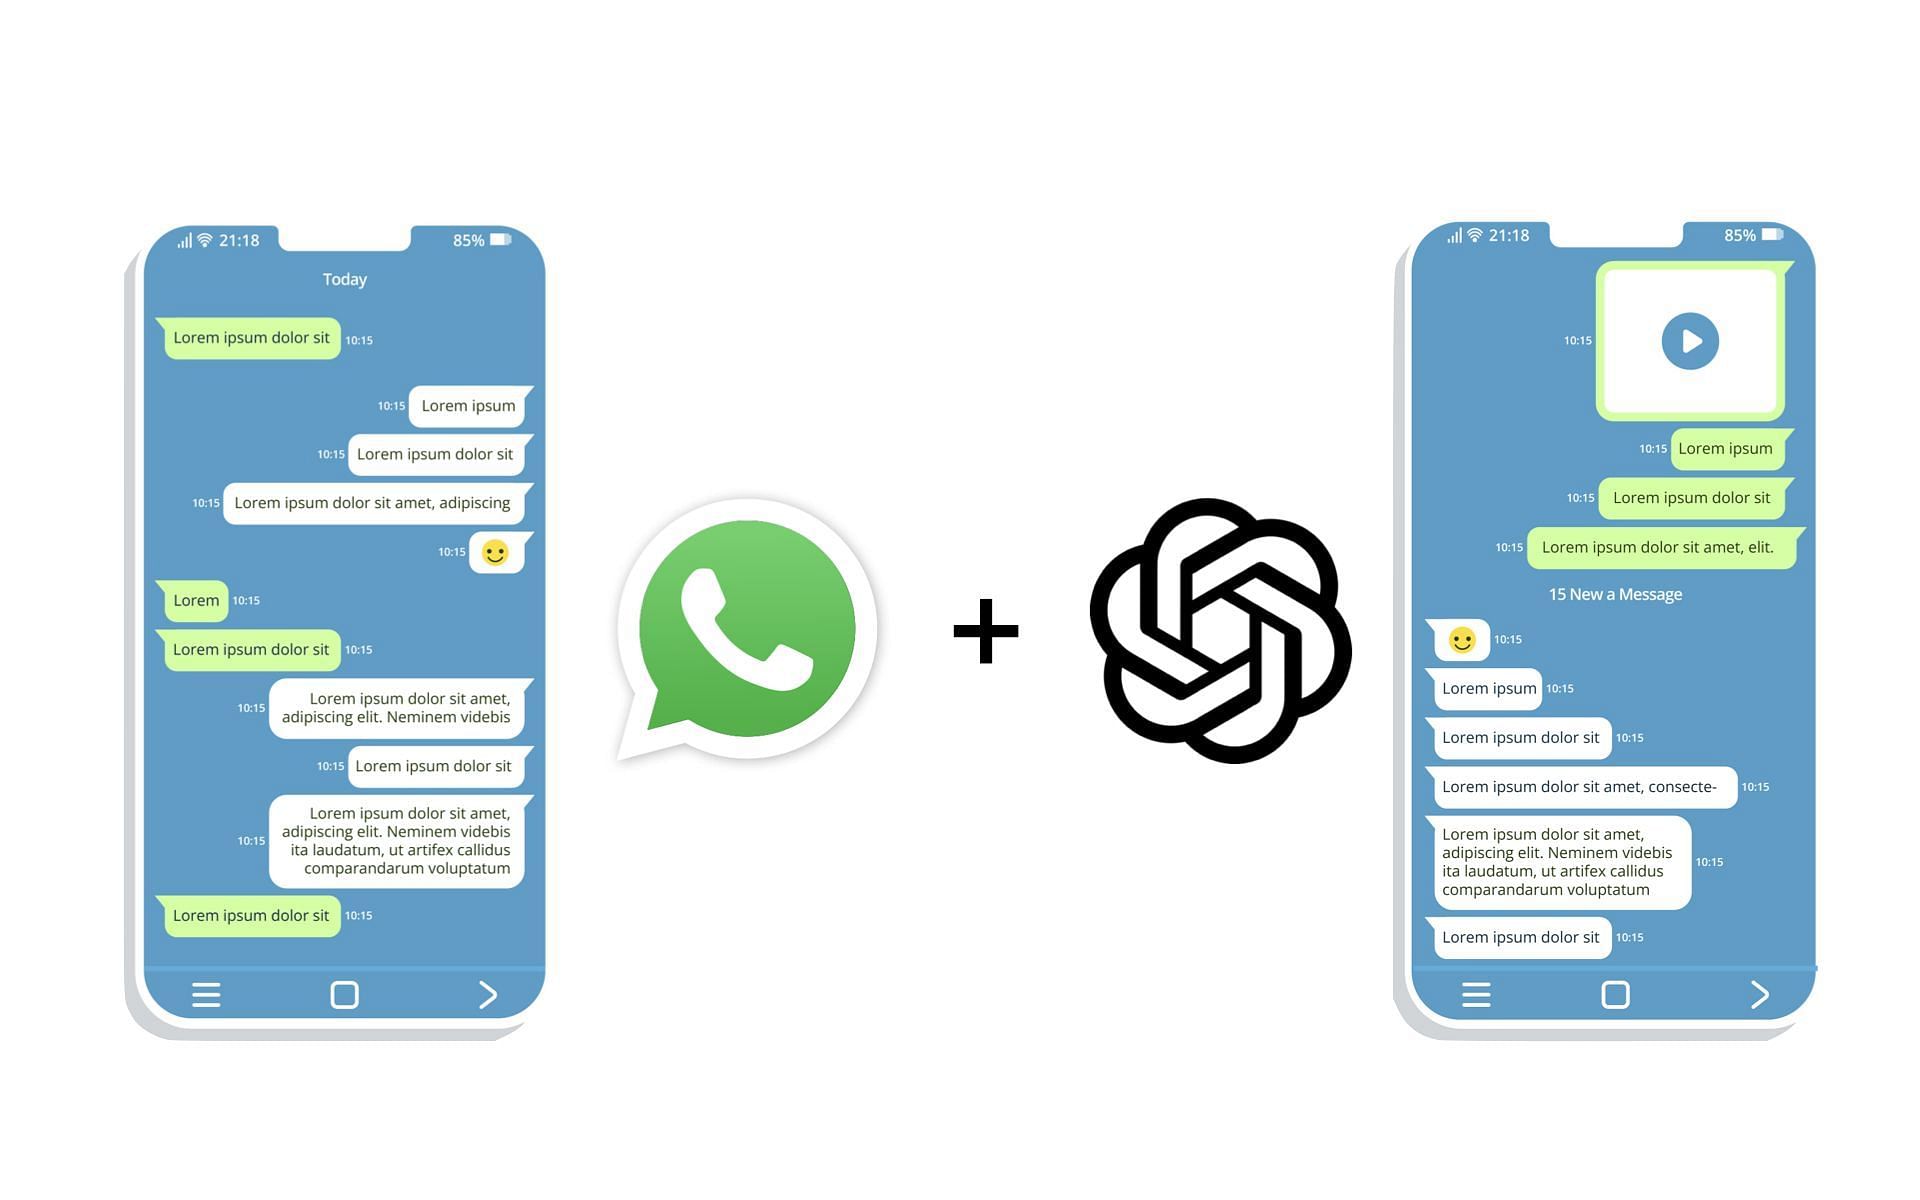 How to integrate ChatGPT with WhatsApp